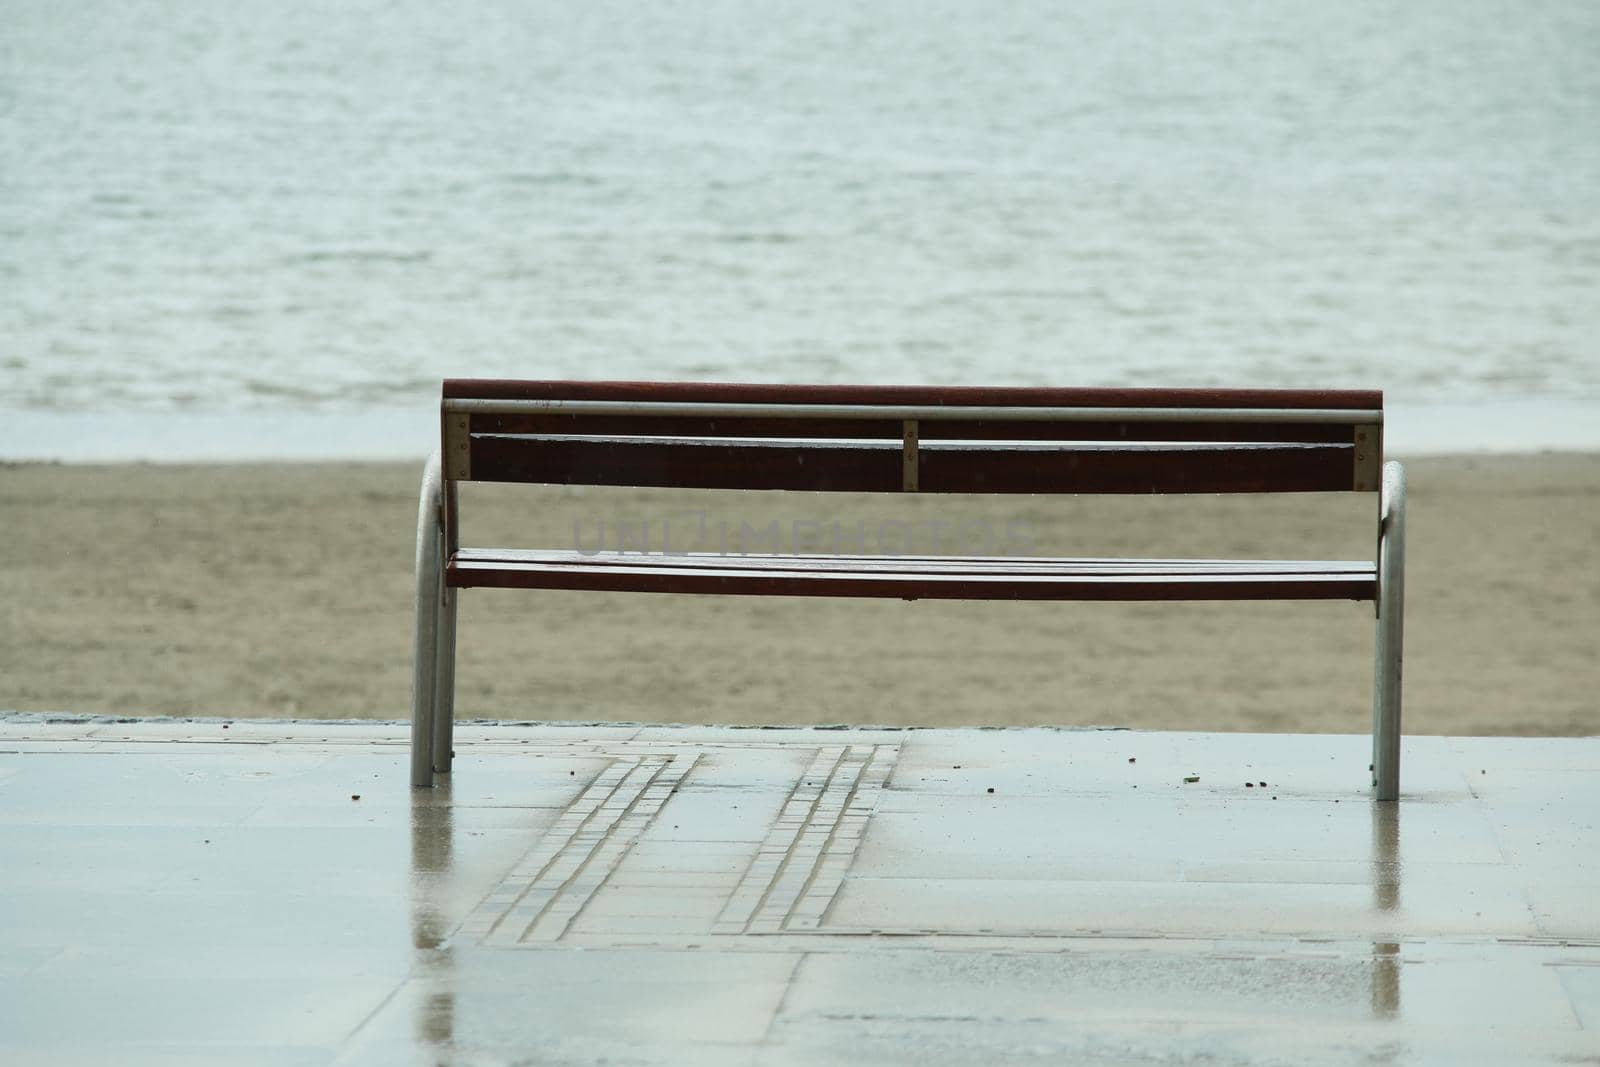 Wooden bench in front of the beach and the ocean on a rainy day by Luise123